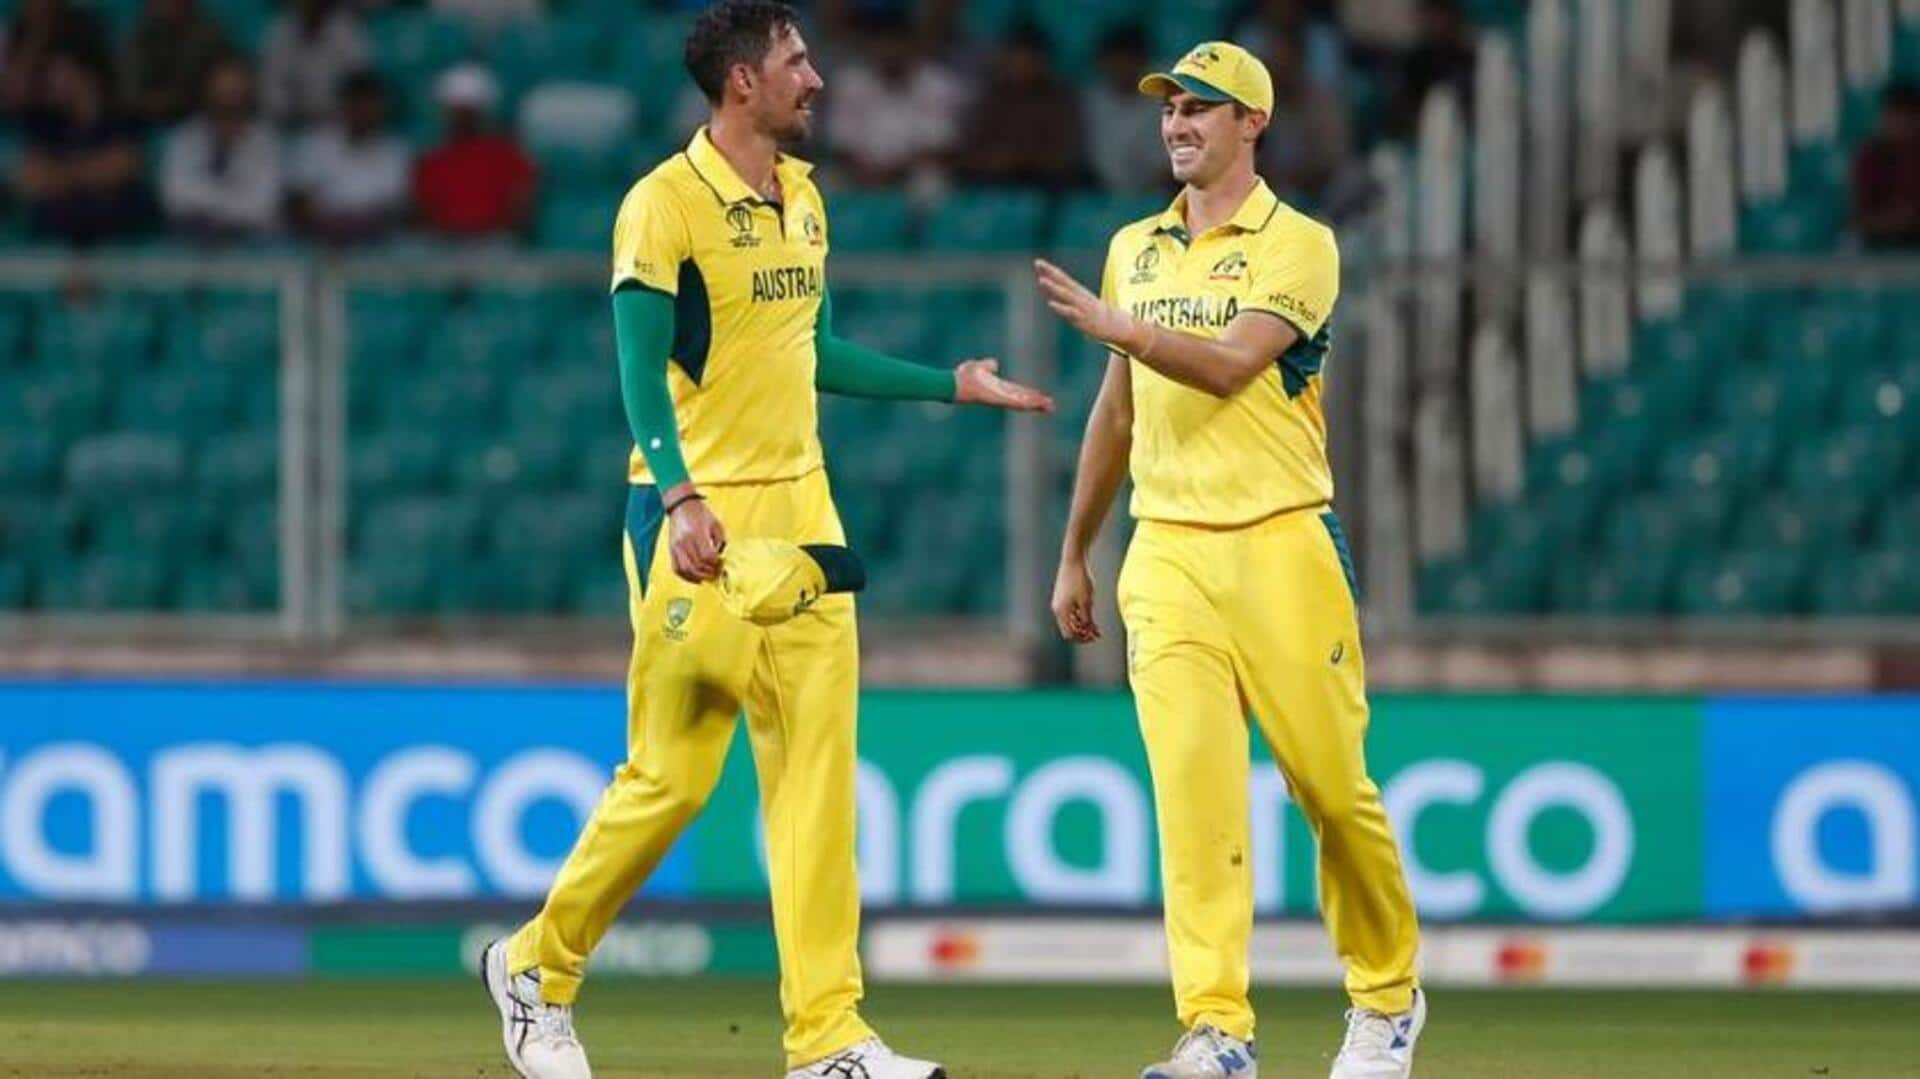 Mitchell Starc becomes the third-highest wicket-taker in ODI WC history 